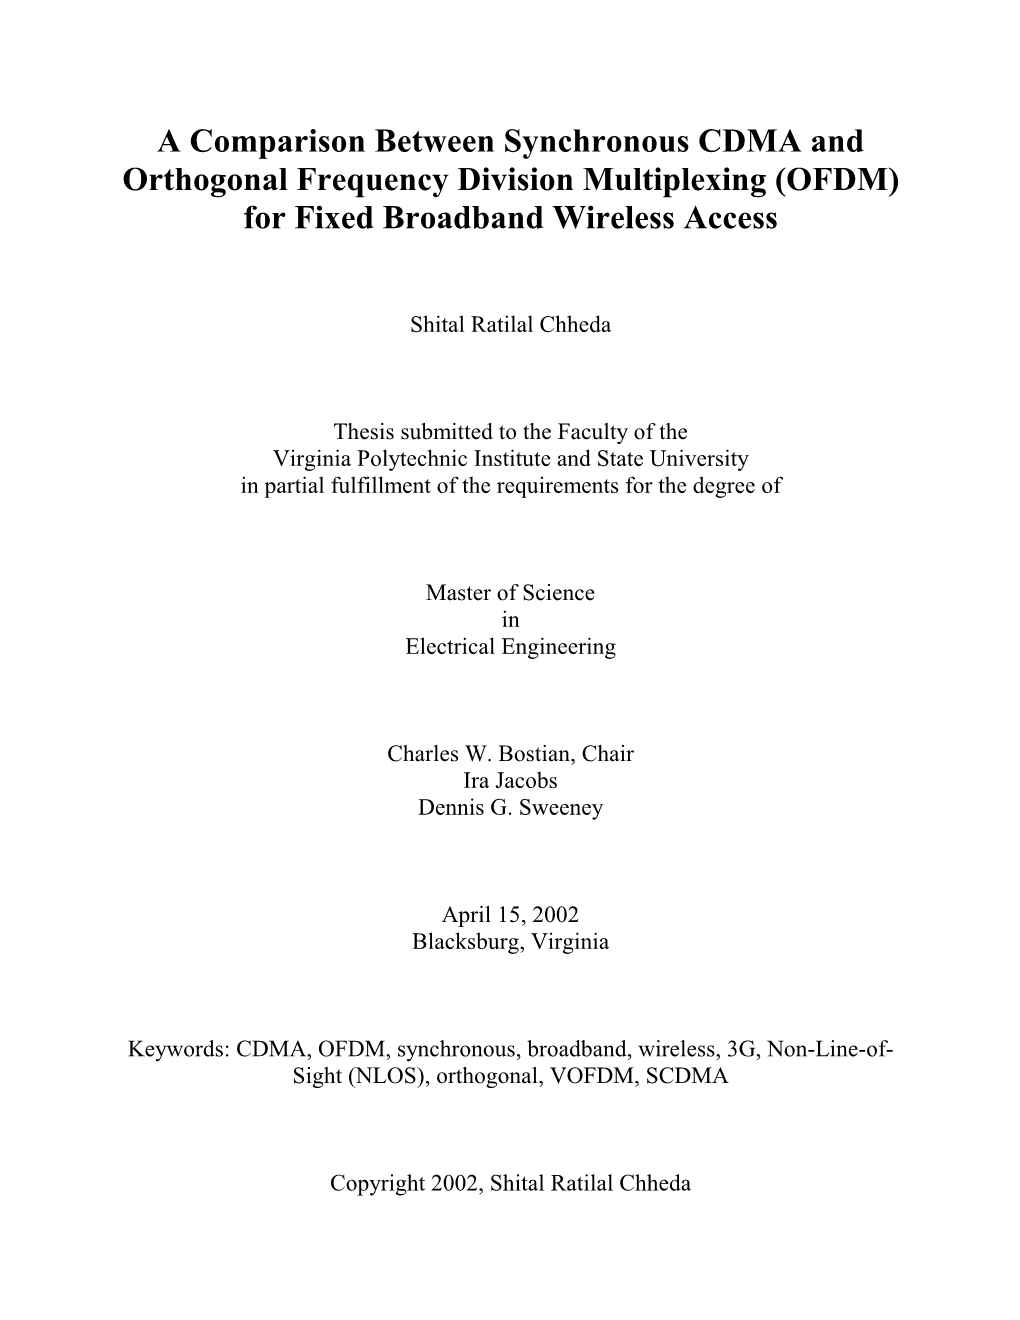 A Comparison Between Synchronous CDMA and Orthogonal Frequency Division Multiplexing (OFDM) for Fixed Broadband Wireless Access